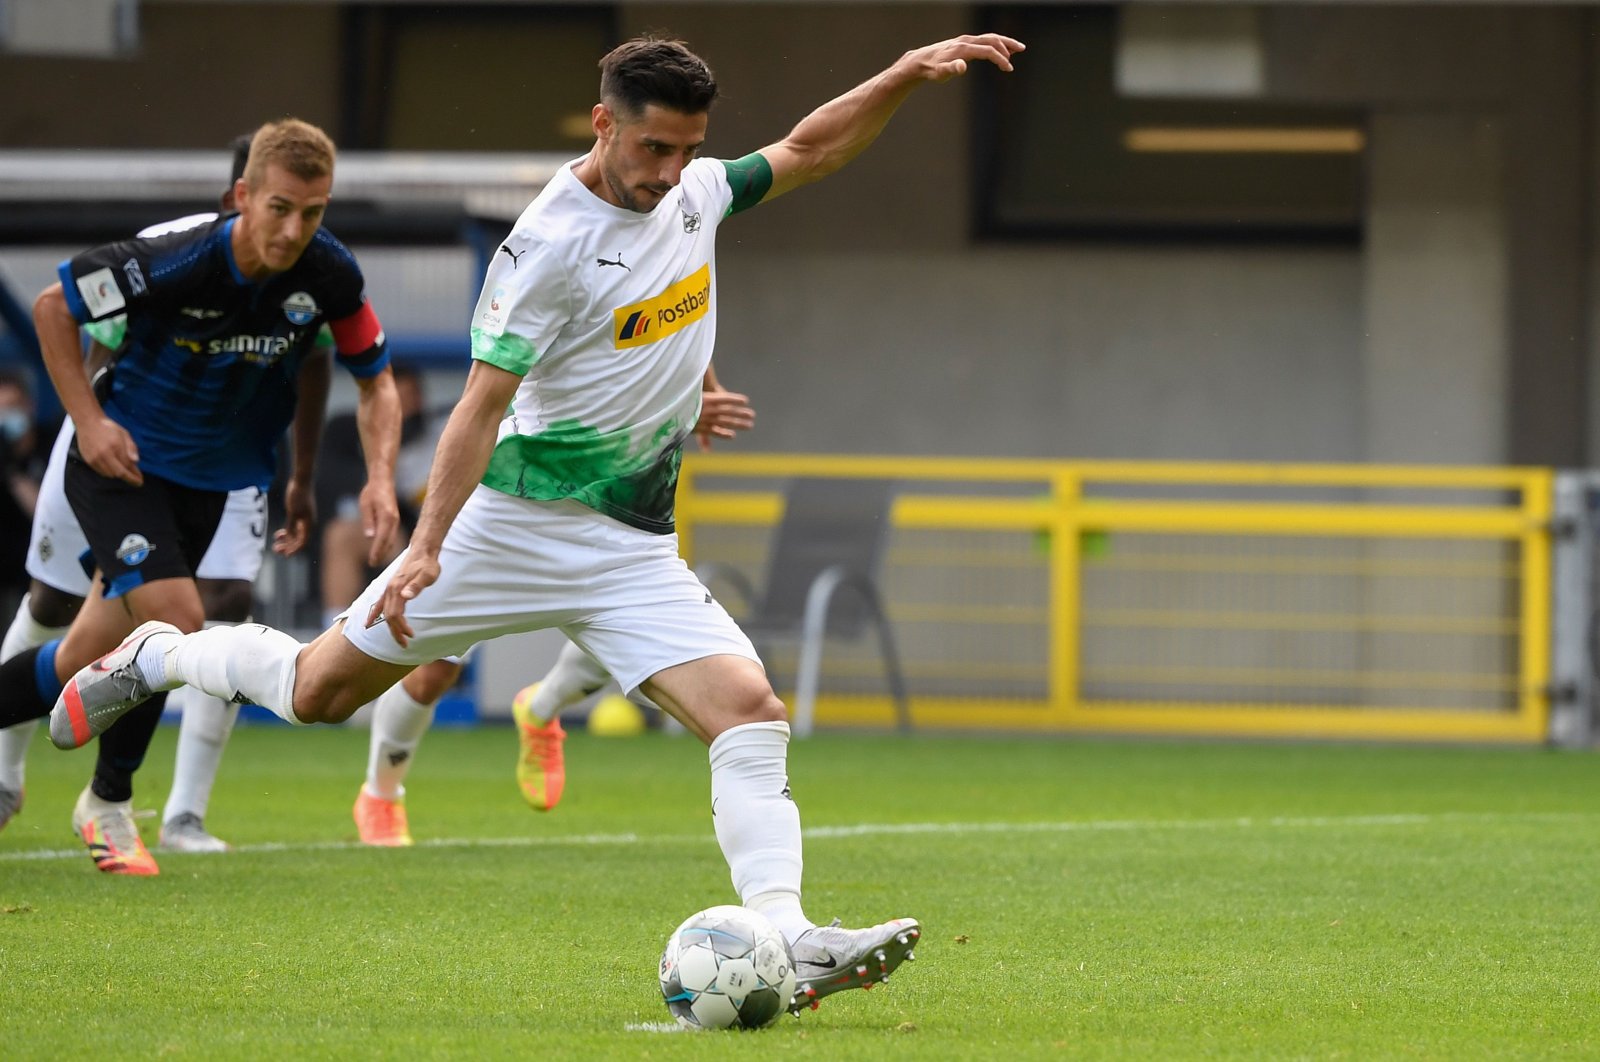 Monchengladbach's Lars Stindl scores from the penalty spot during the Bundesliga match against SC Paderborn in Paderborn, Germany, June 20, 2020. (AFP Photo)